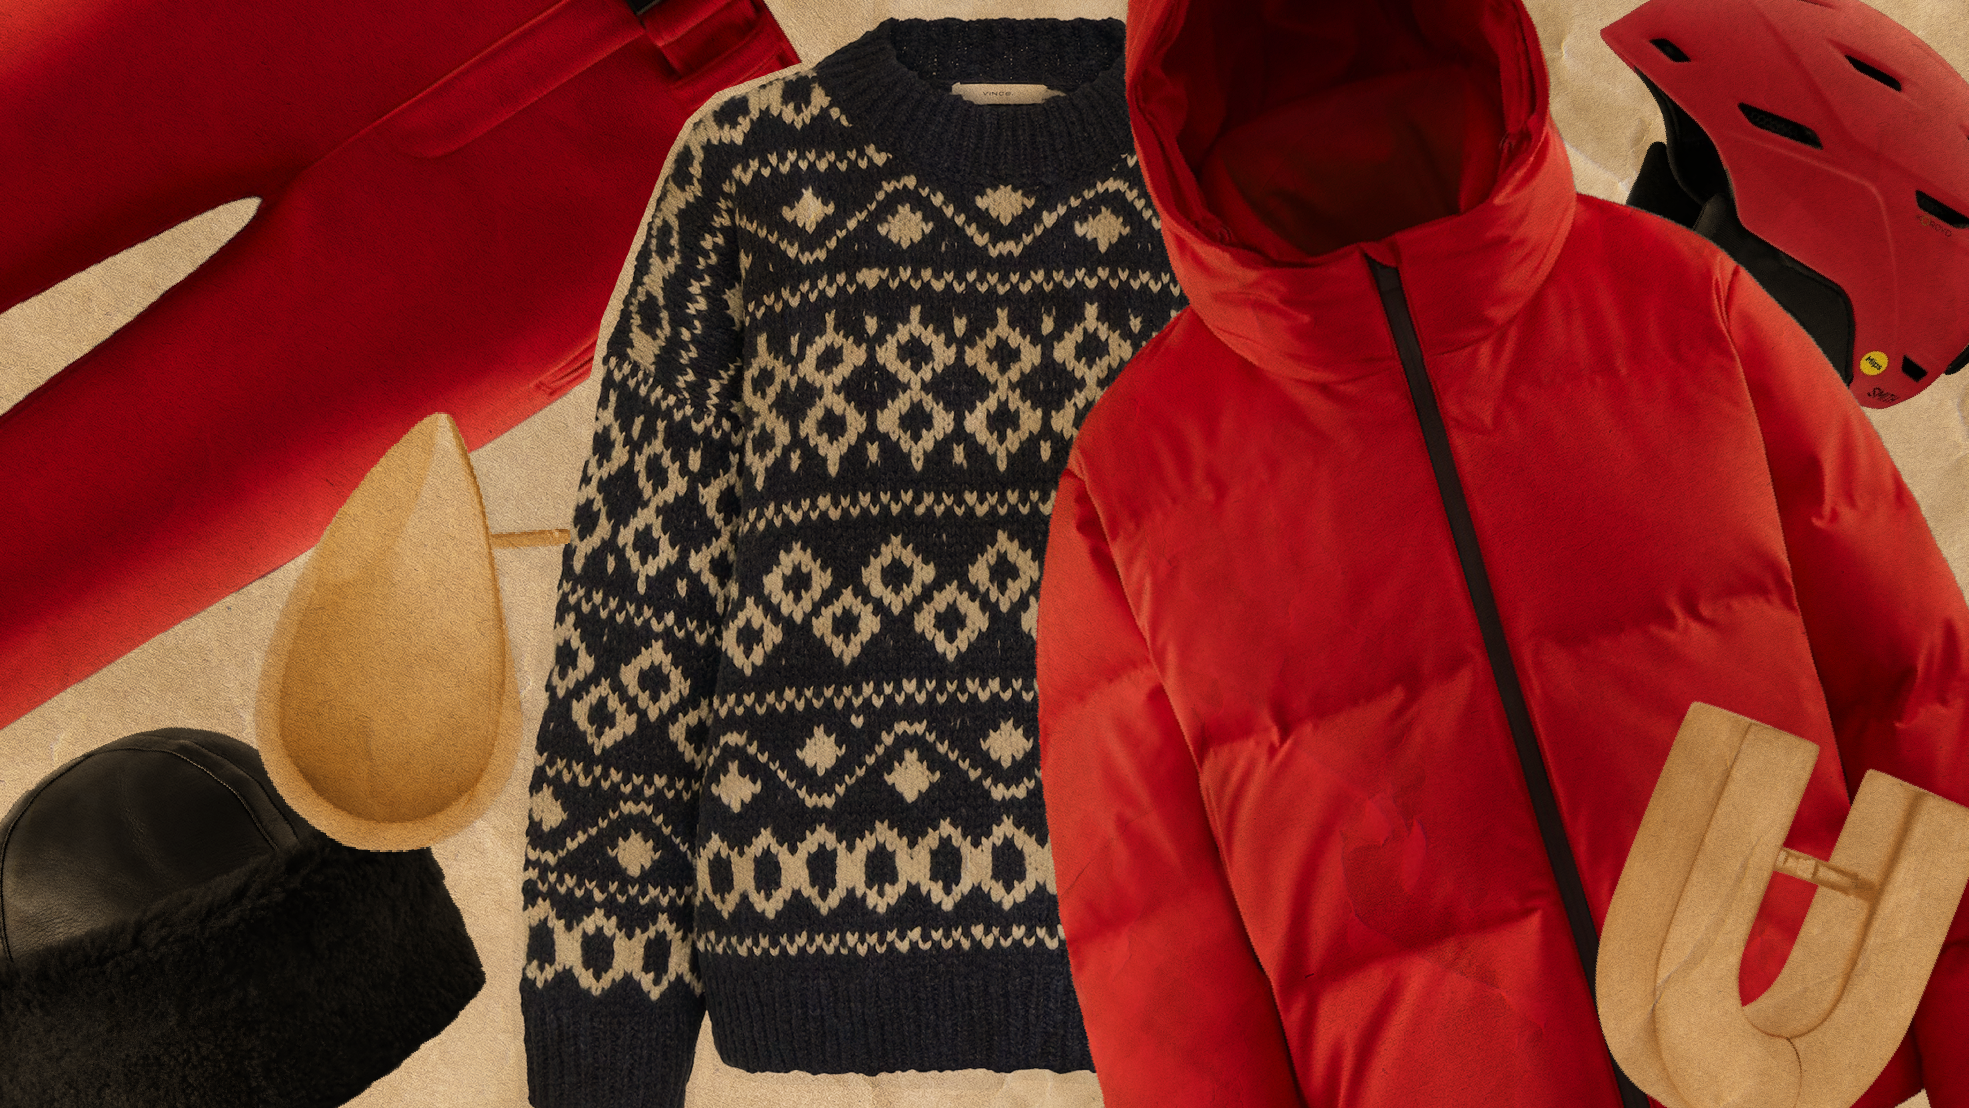 get inspired to ski in style